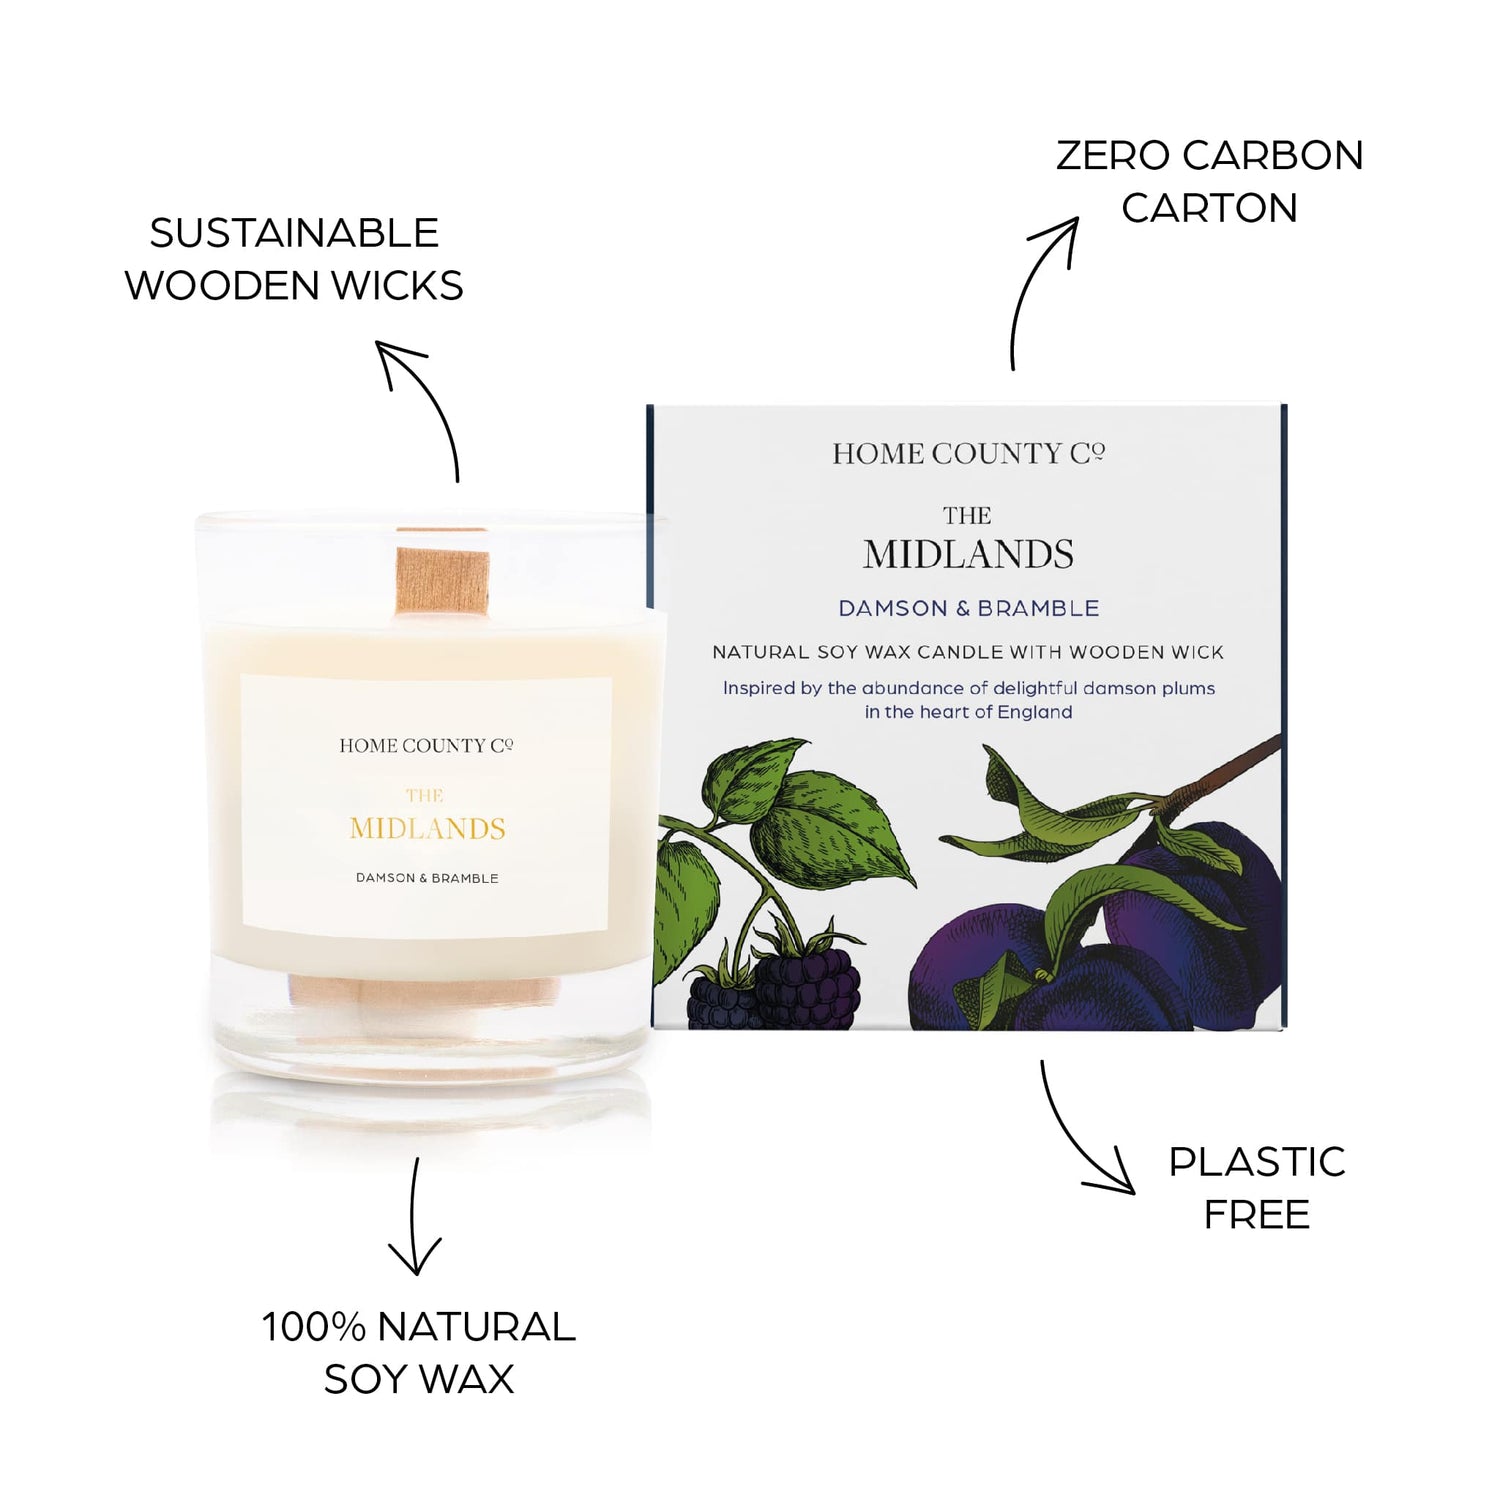 Sustainable candle credentials are shown around the plum scented candle image - sustainable wooden wicks, zero carbon carton, 100% natural soy wax, plastic free